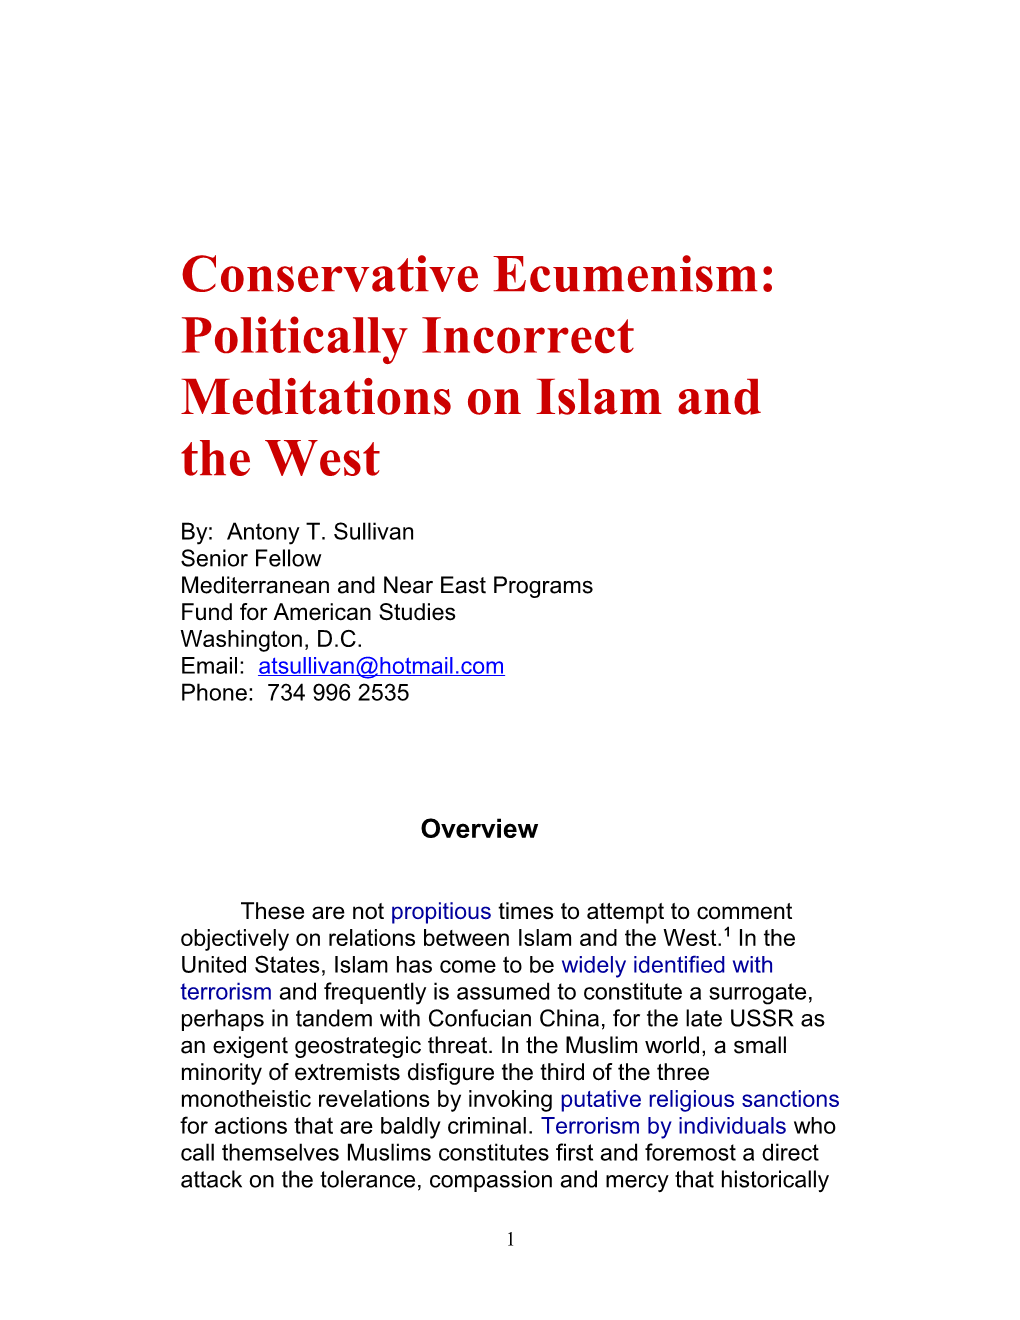 Conservative Ecumenism: Politically Incorrect Meditations on Islam and the West